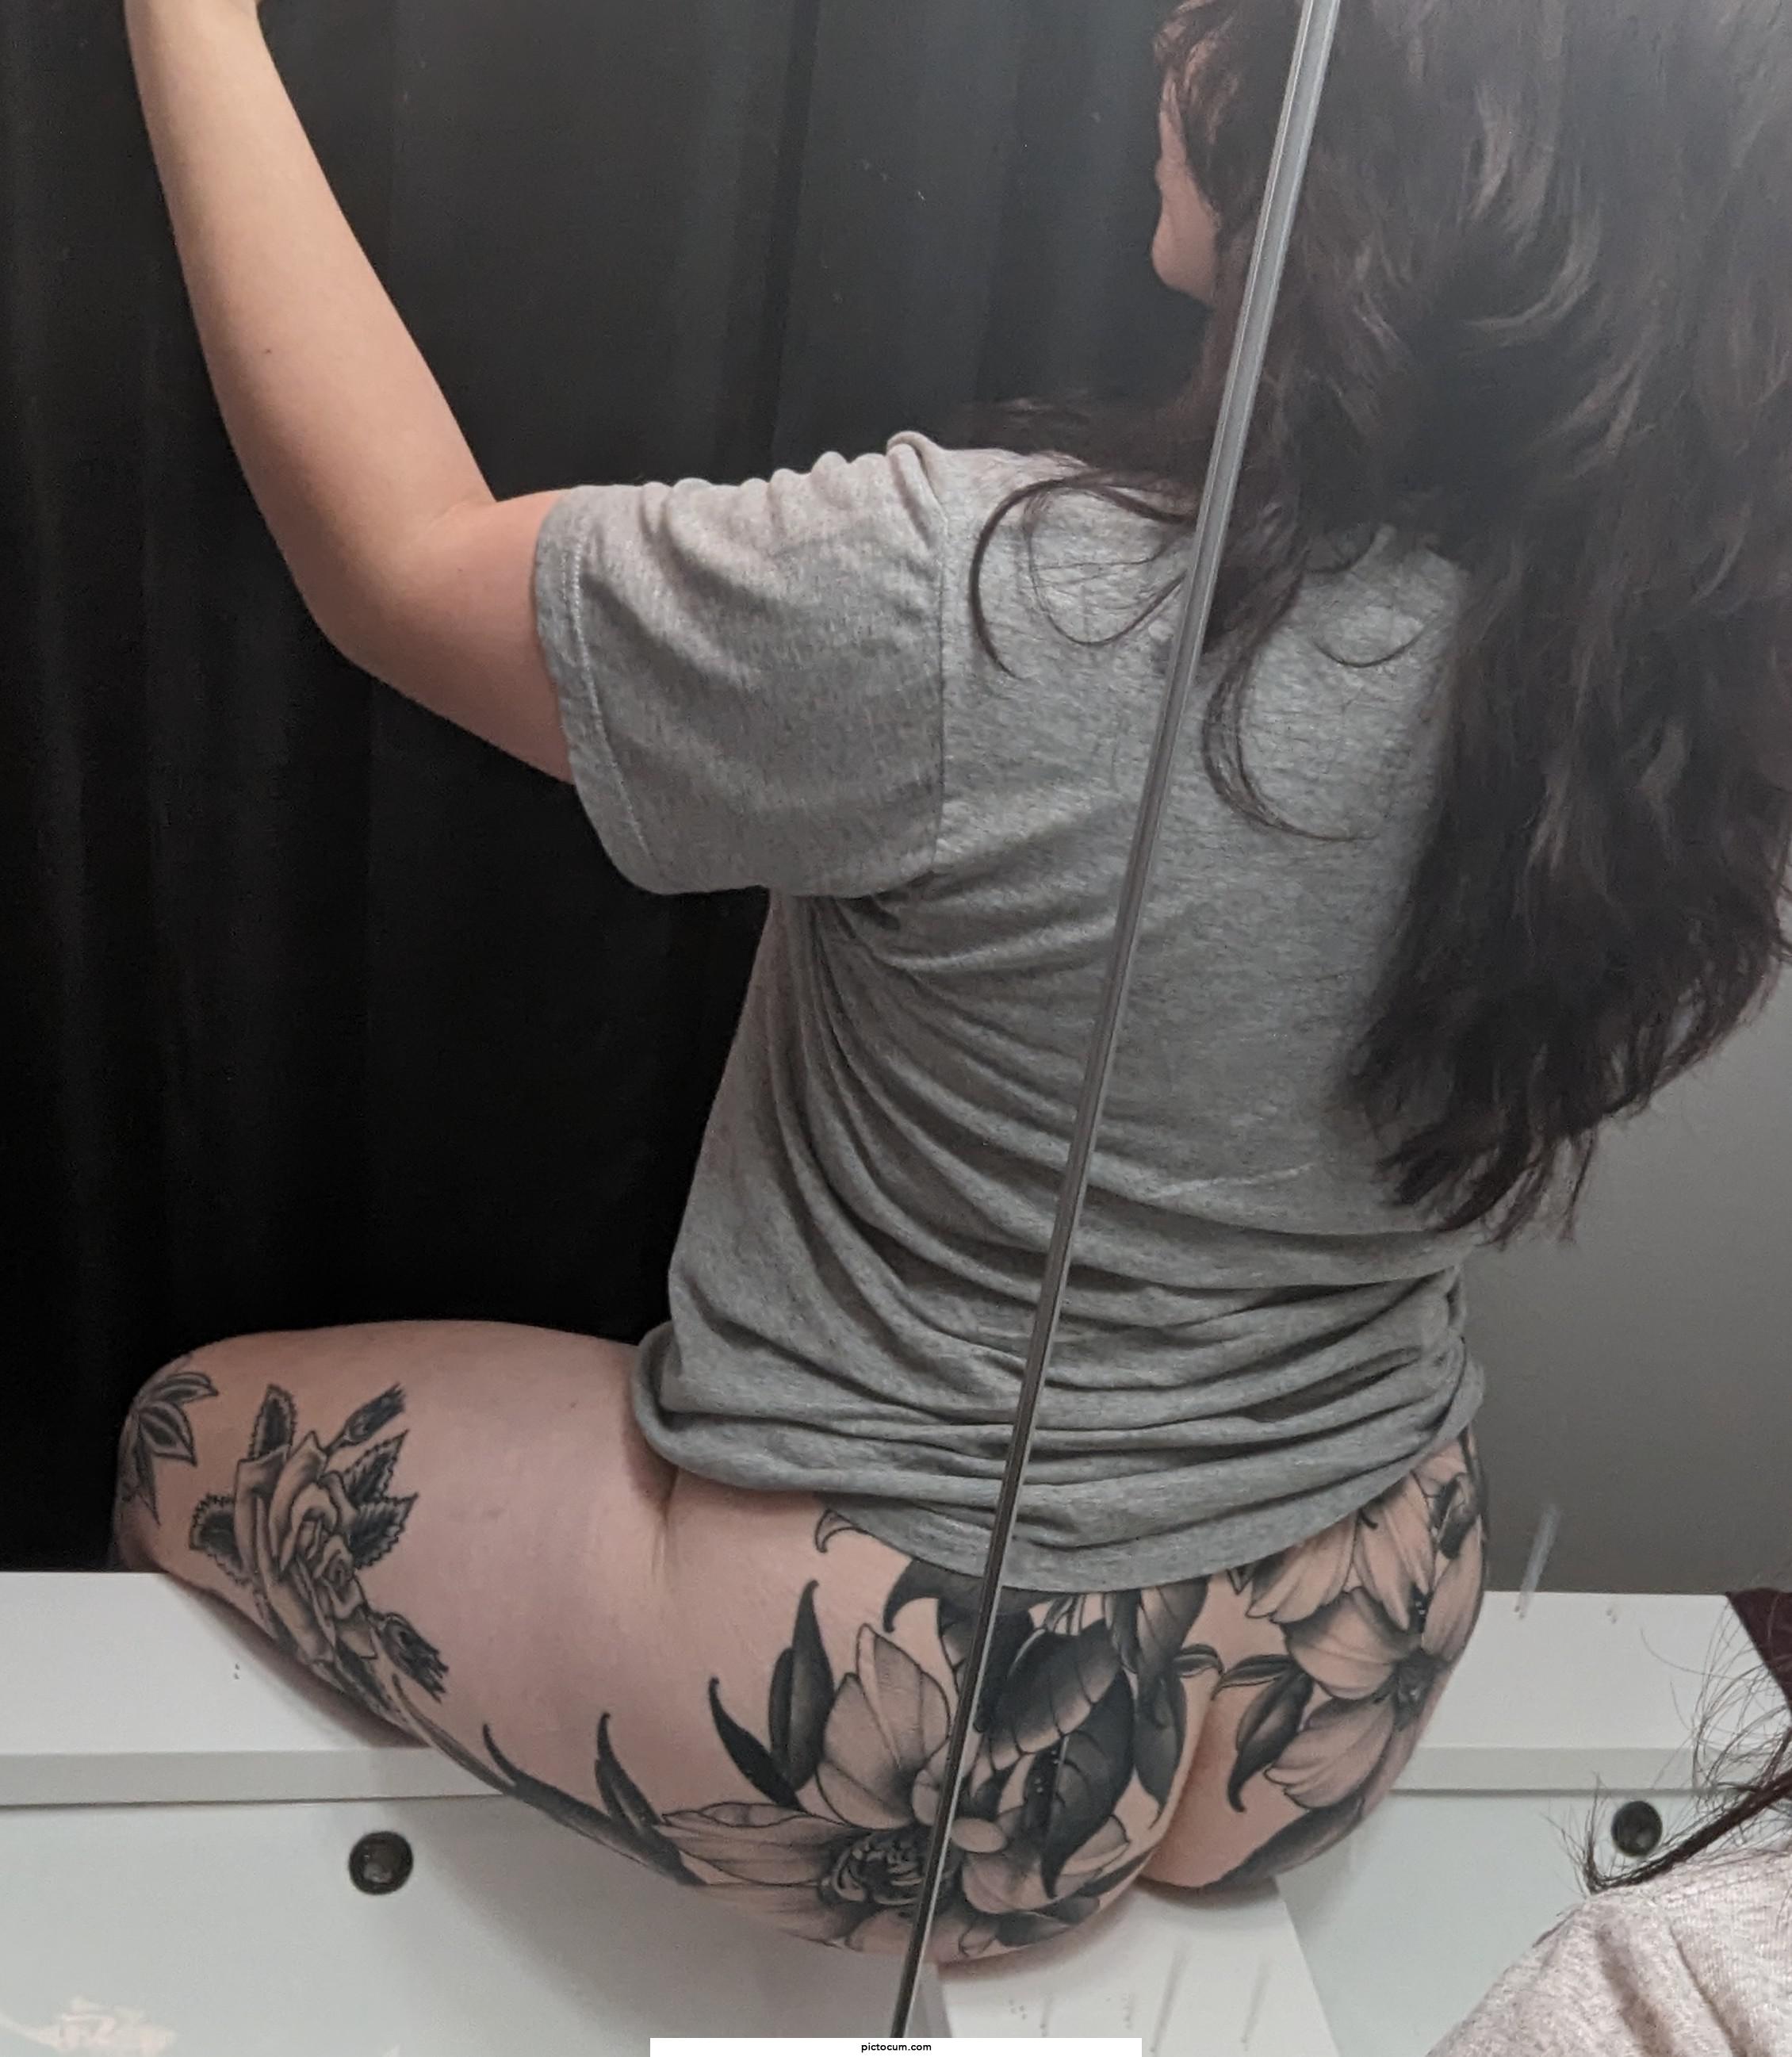 A whole lot of tatted booty for you